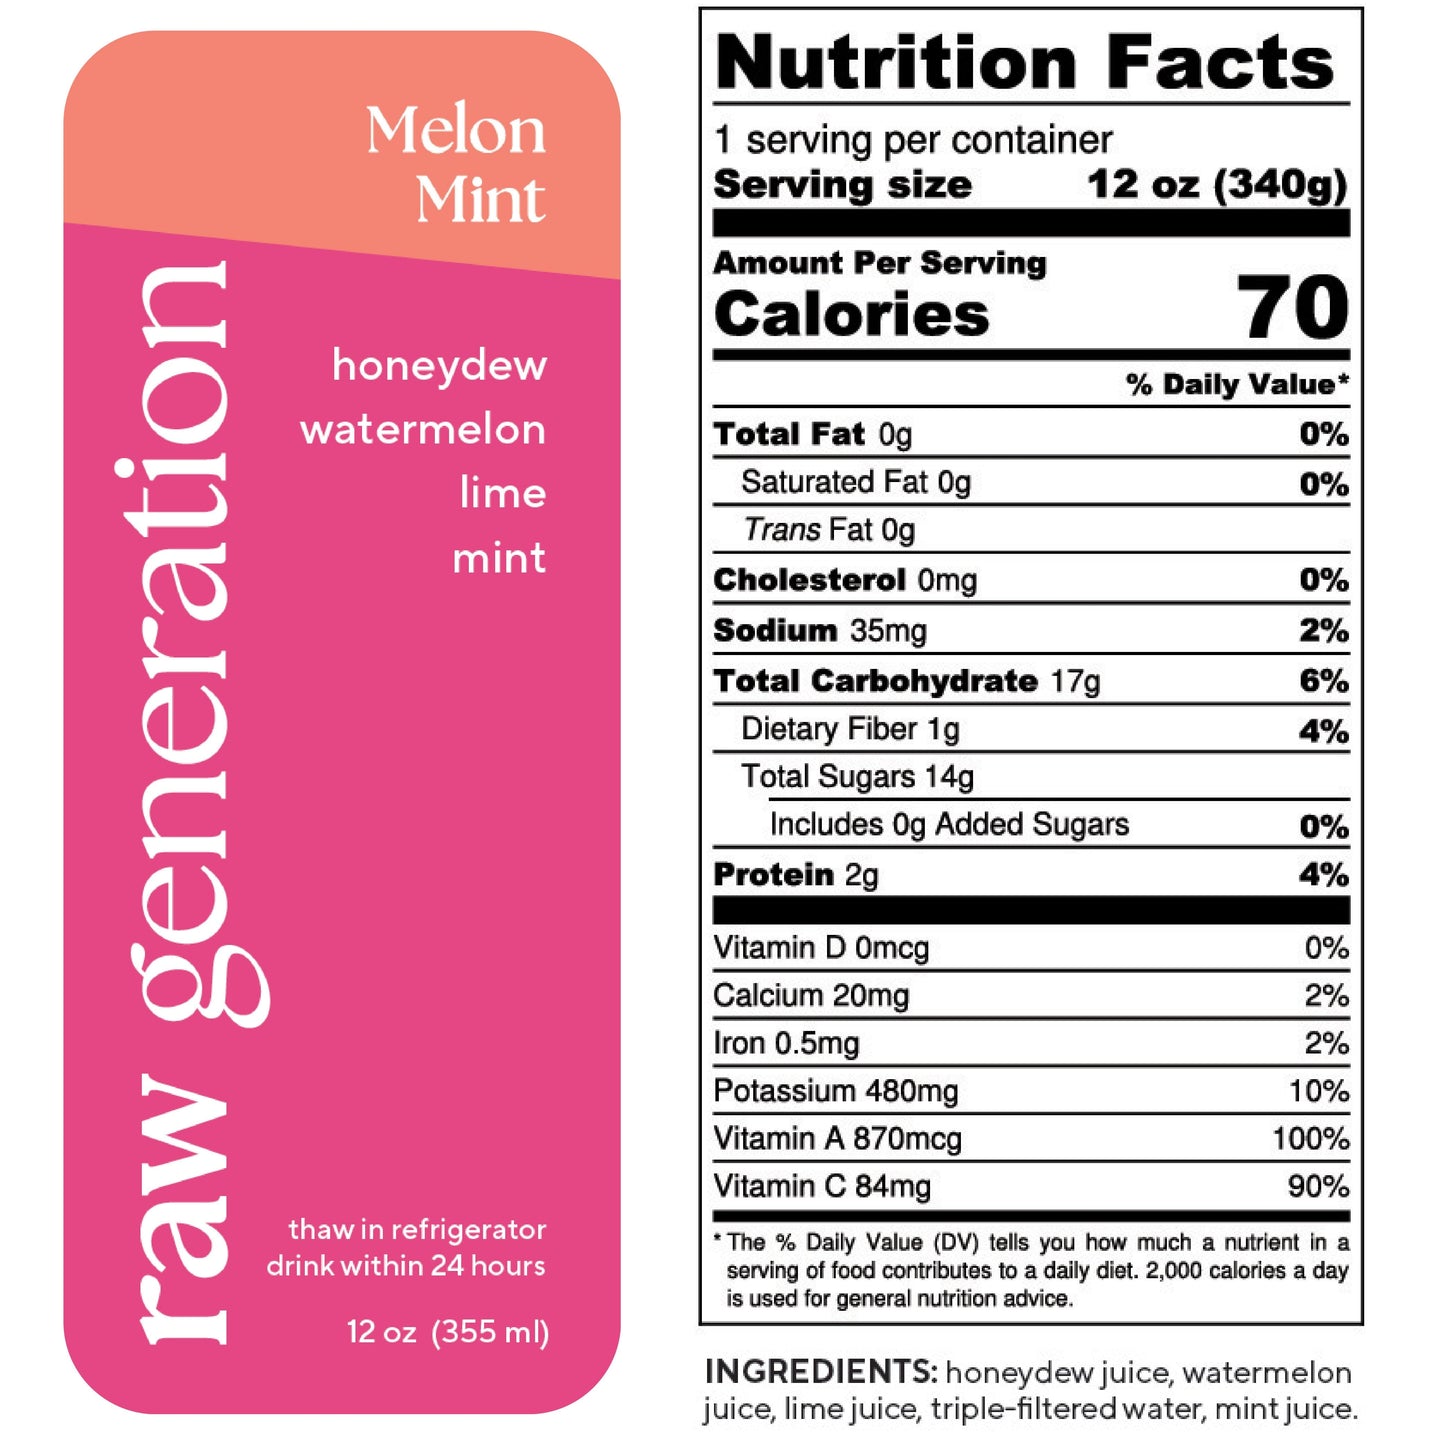 Nutrition Facts, 1 serving/container, 12 oz (340g), Calories 70, Total Fat 0g, Saturated Fat 0g, Trans Fat 0g, Cholesterol 0mg, Sodium 35mg, Total Carbohydrate 17g, Dietary Fiber 1g, Total Sugars 14g, Added Sugars 0g, Protein 2g, Vitamin D 0mcg, Calcium 20mg, Iron 0.5mg, Potassium 480mg, Vitamin A 870mcg, Vitamin C 84mg; Ingredients: honeydew juice, watermelon juice, lime juice, triple-filtered water, mint juice.